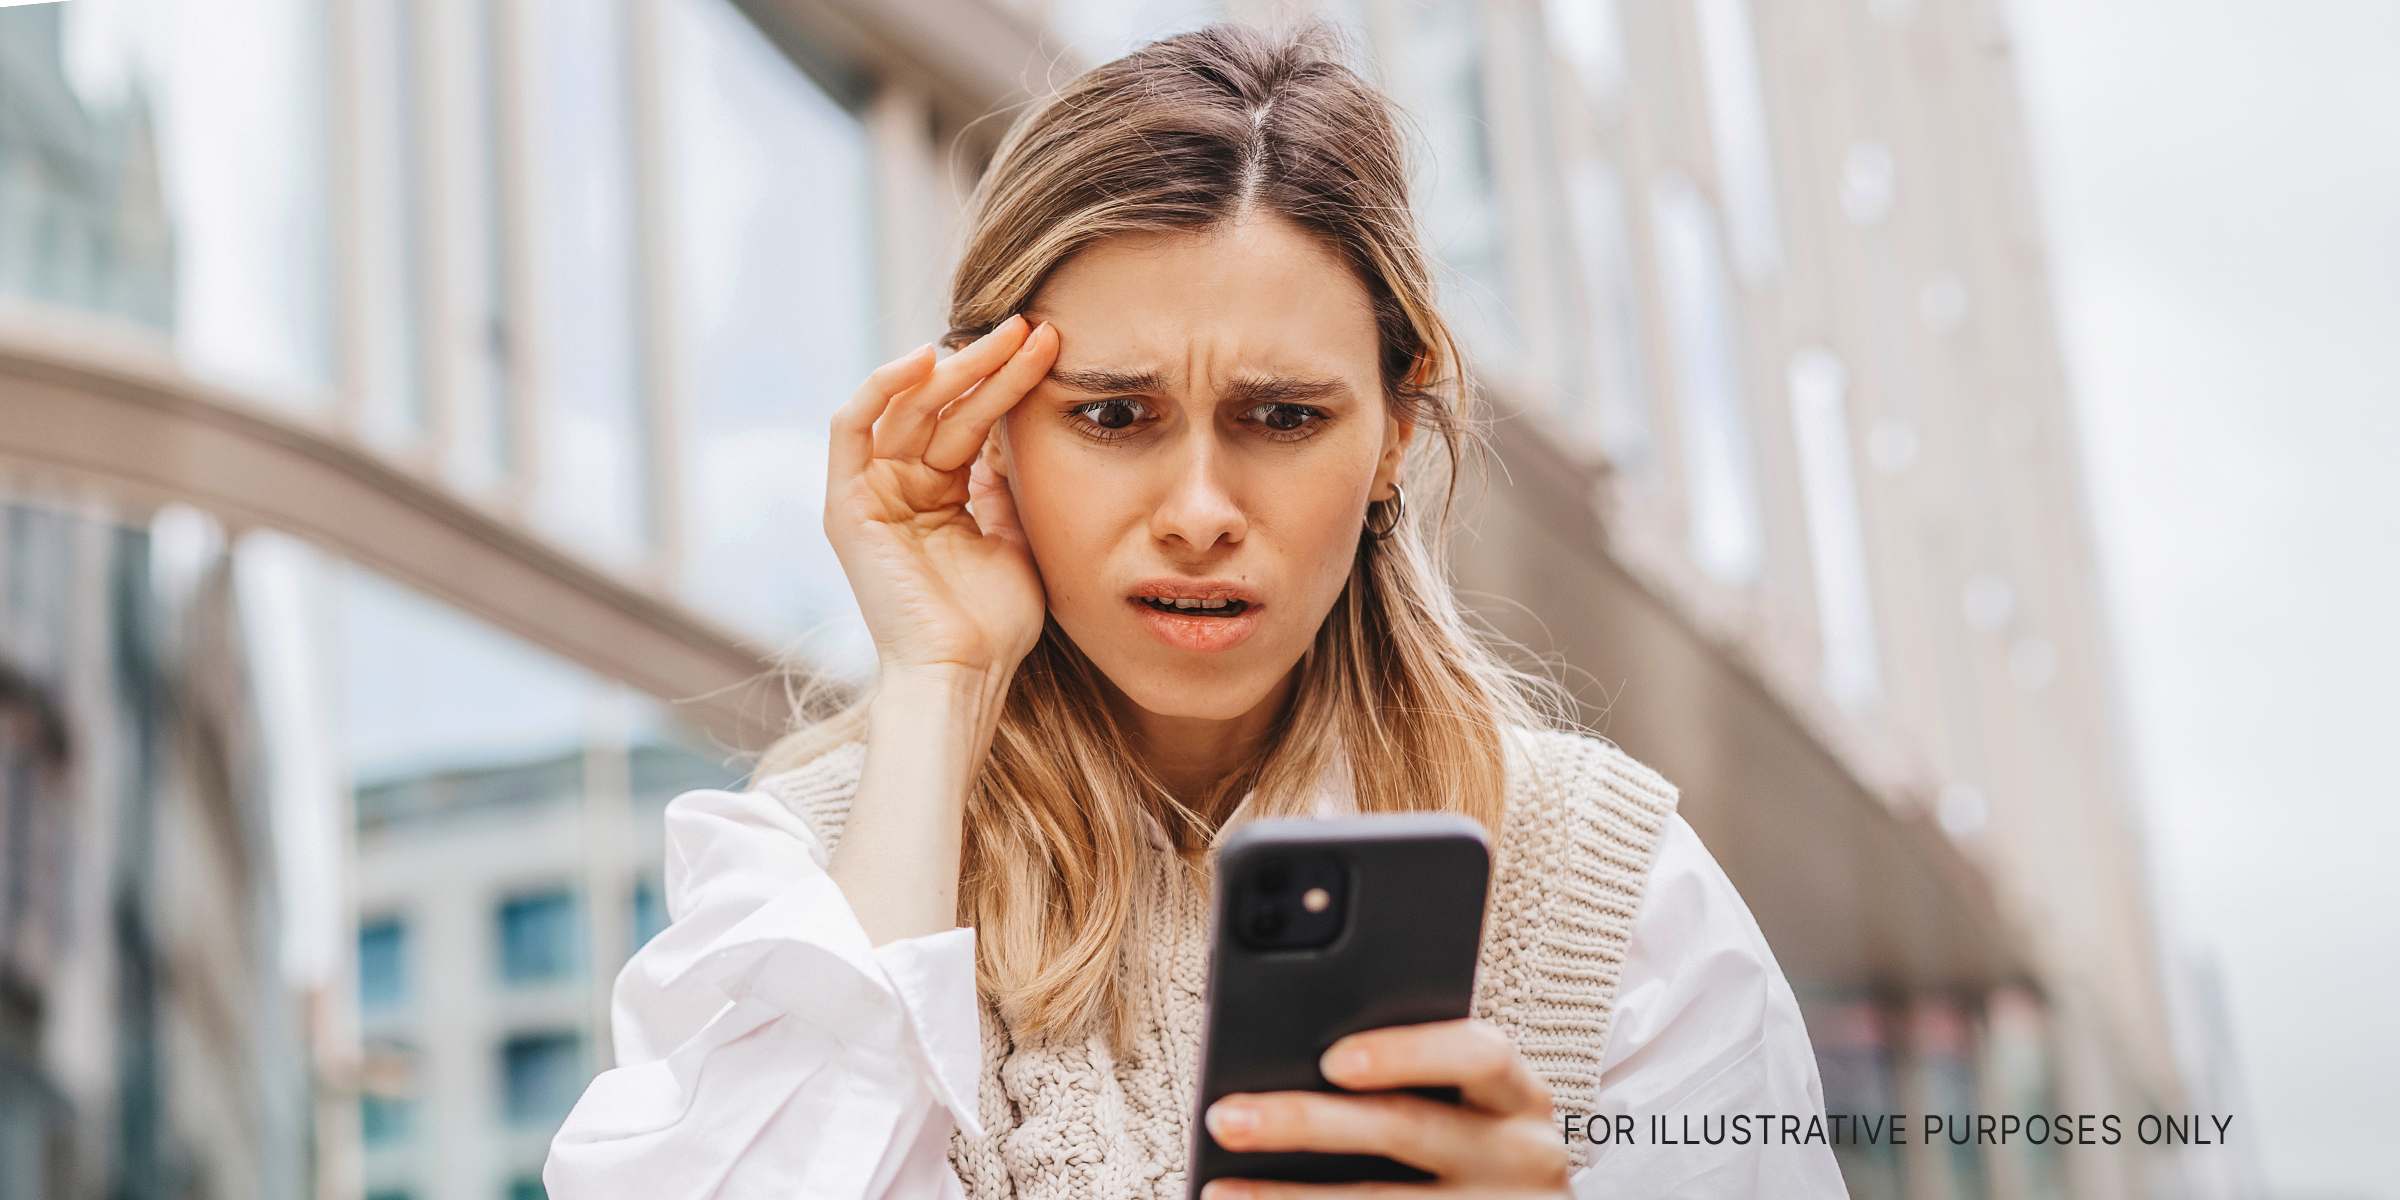 A woman looking at her phone | Source: Shutterstock